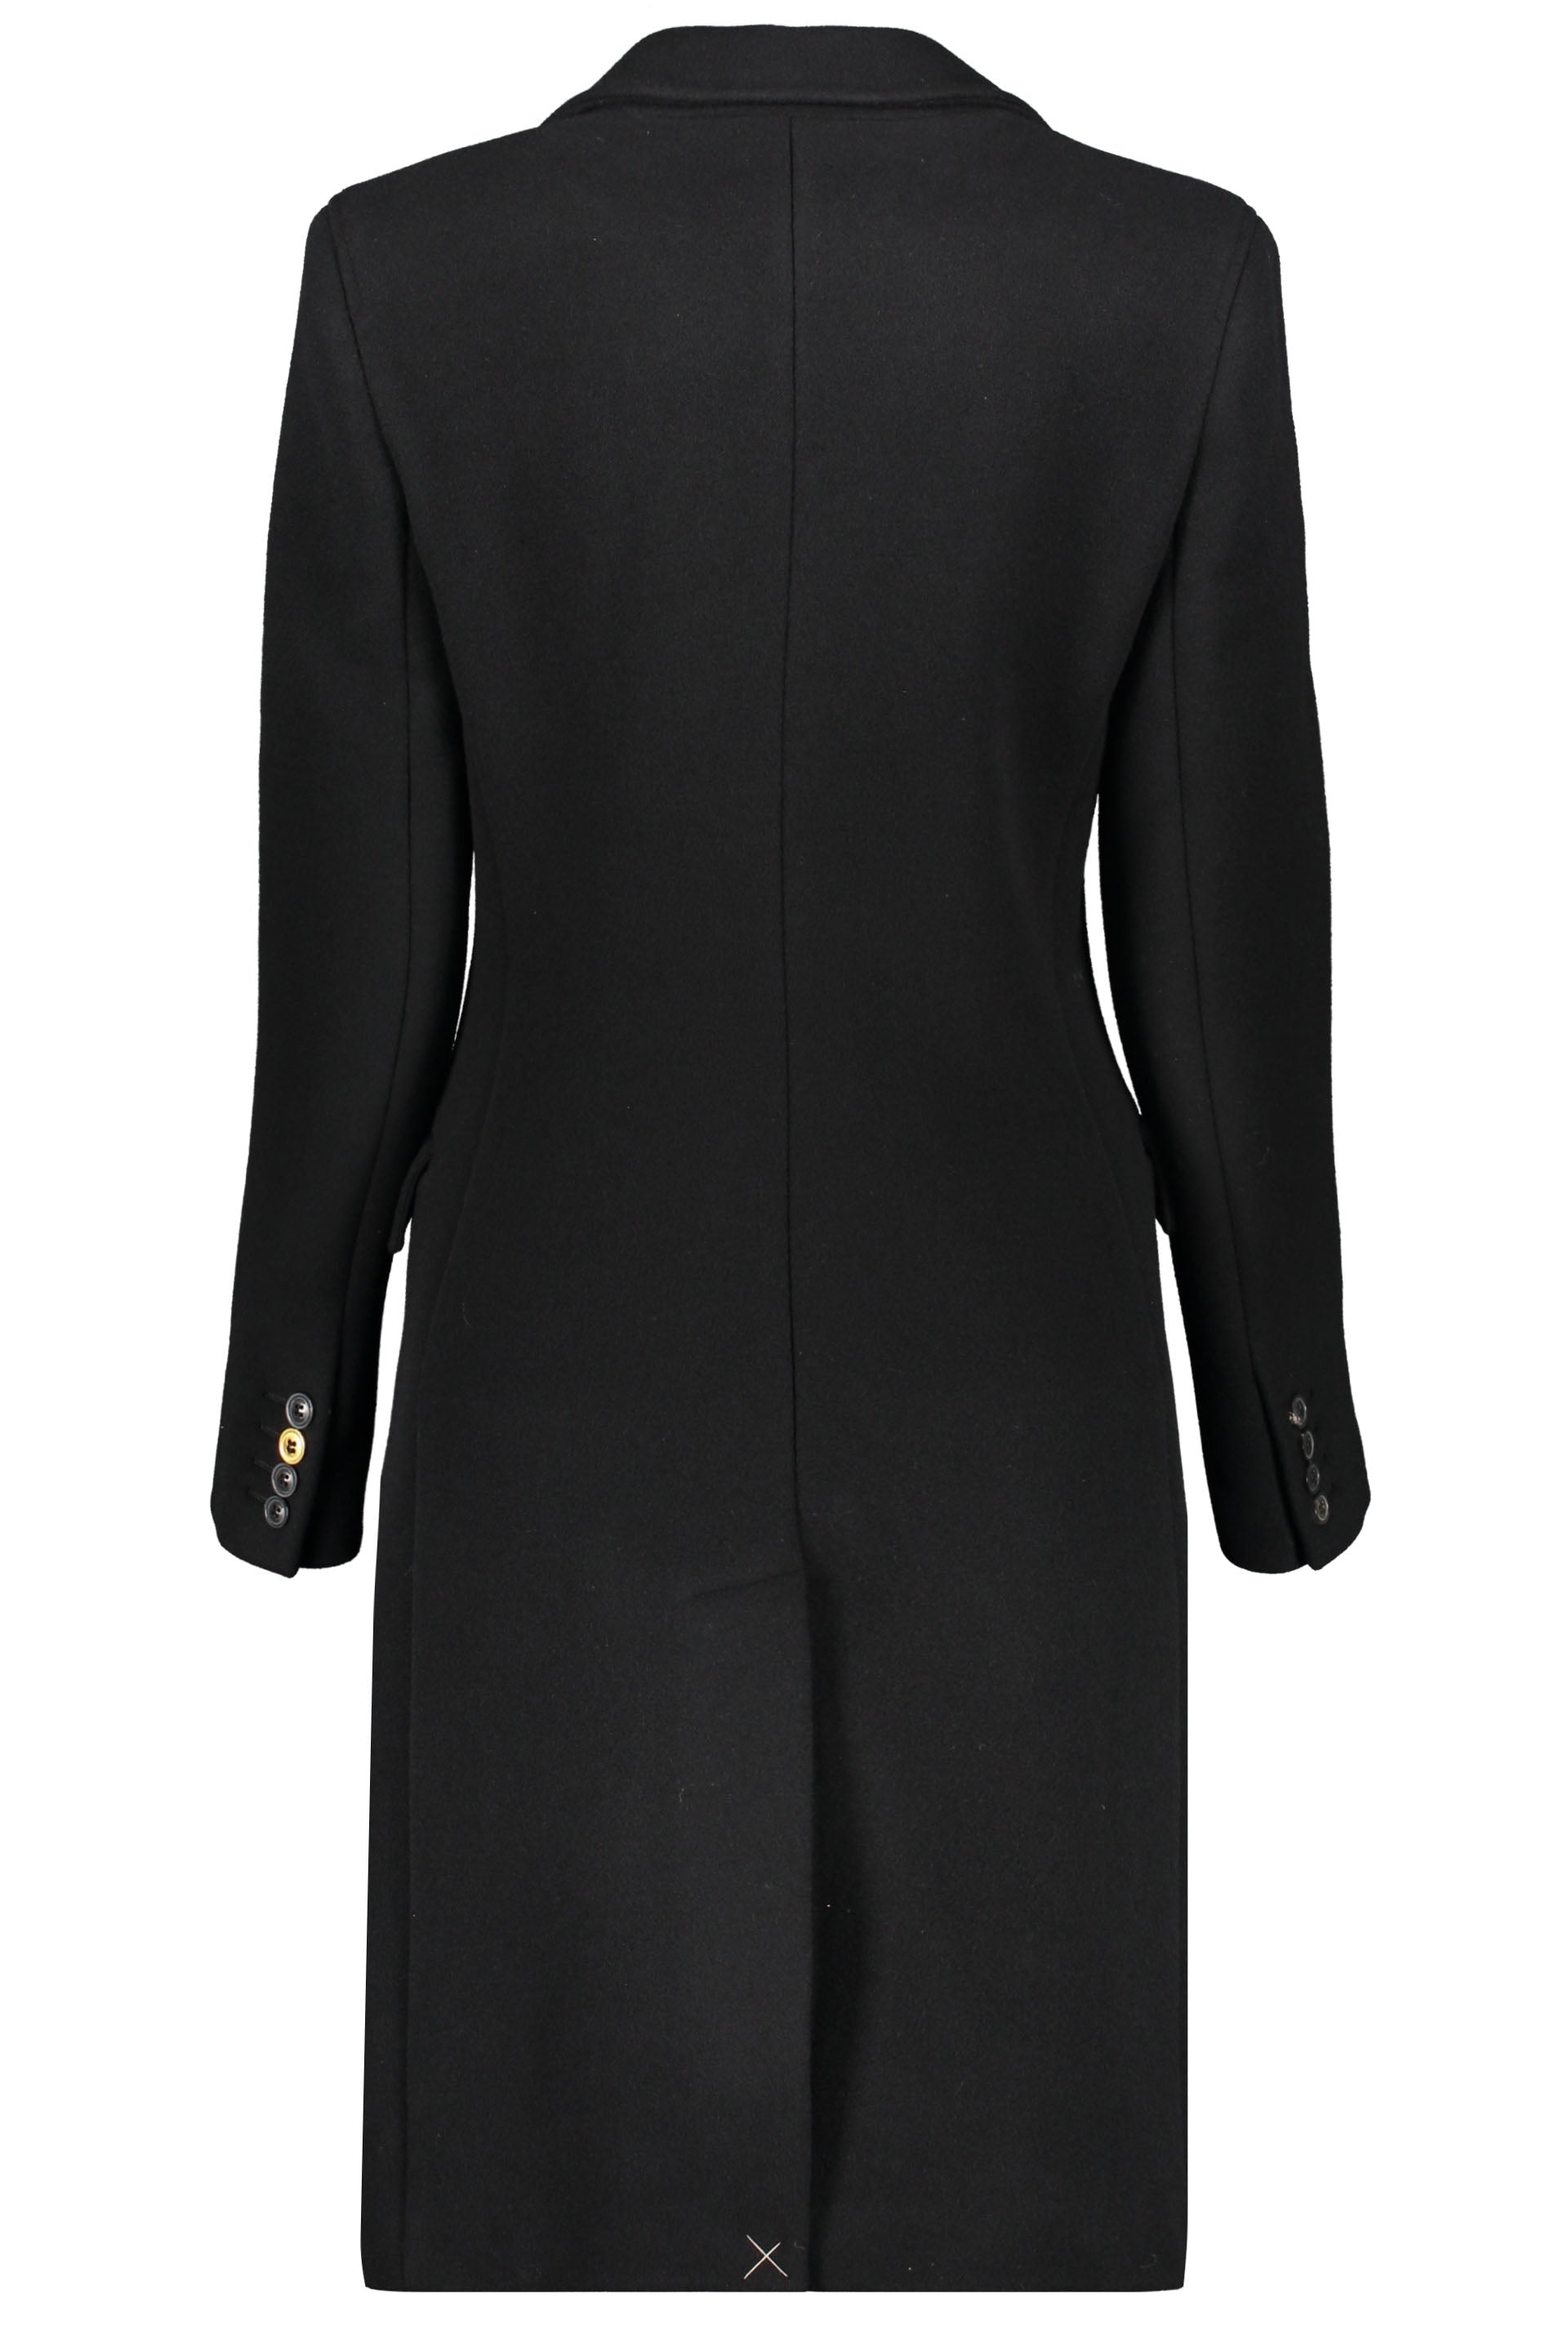 Agnona-OUTLET-SALE-Wool-and-cashmere-coat-Jacken-Mantel-ARCHIVE-COLLECTION-2.jpg